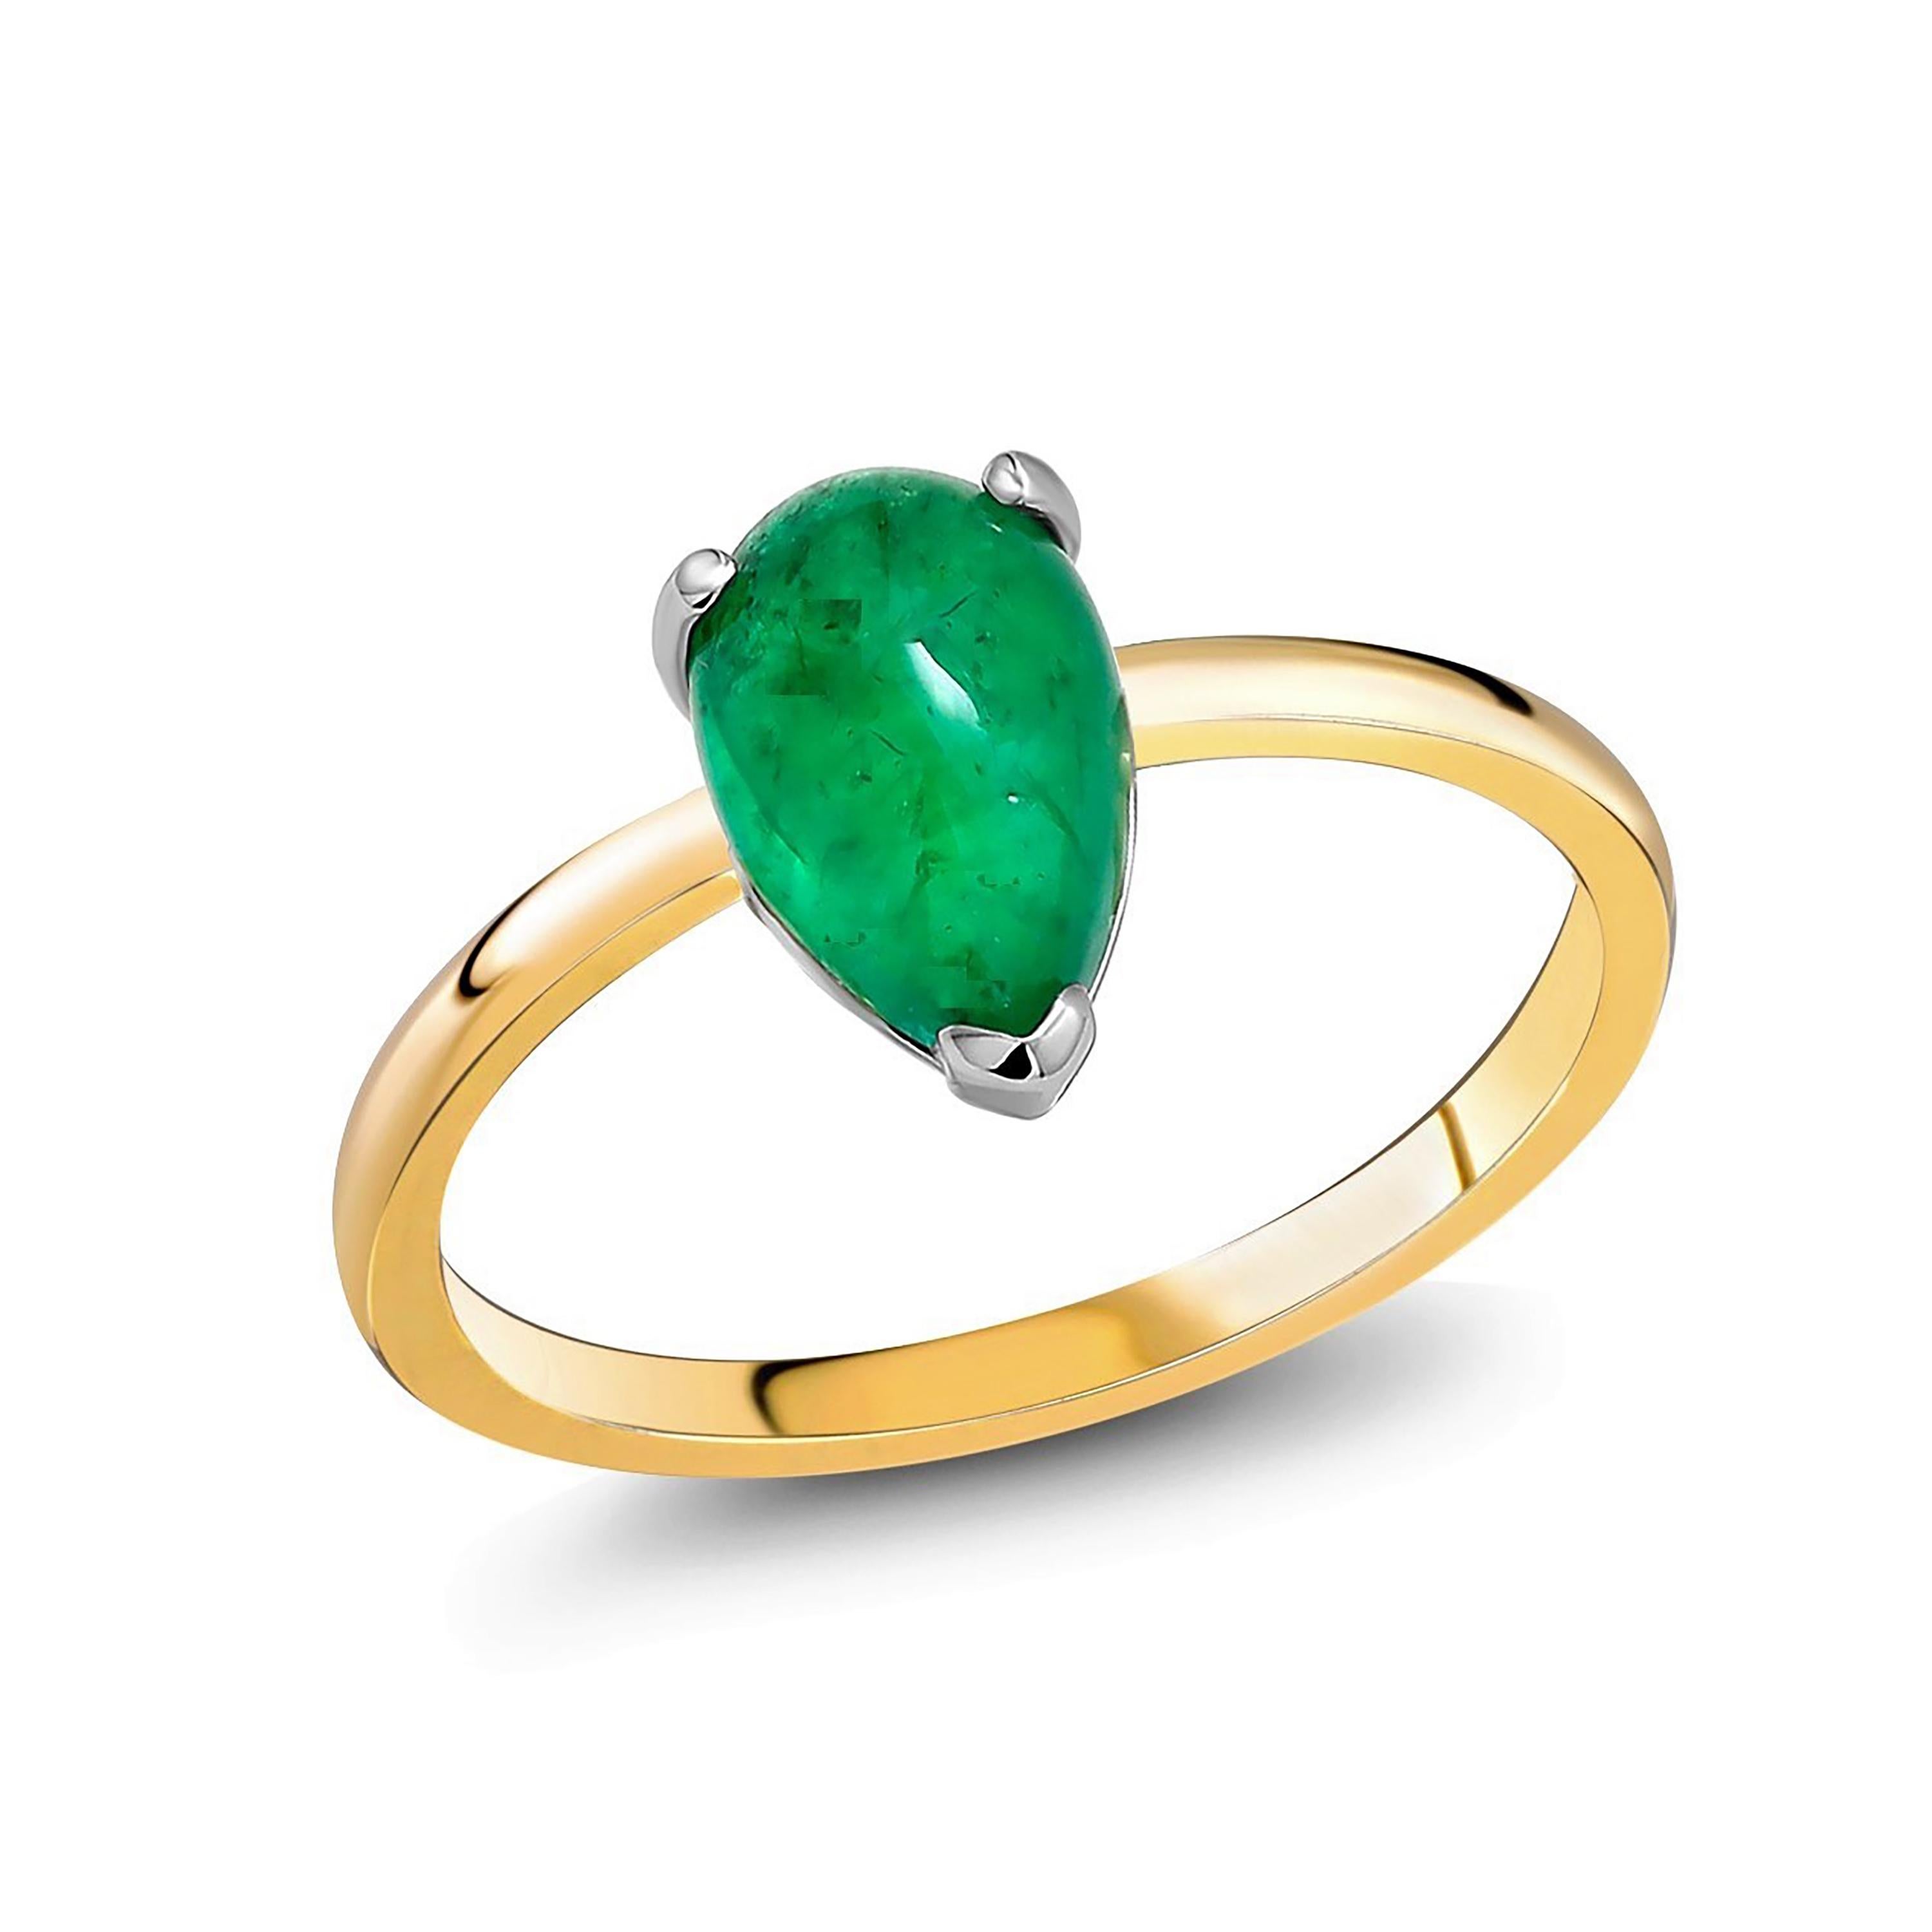 Women's Pear Shaped Cabochon Emerald Solitaire Yellow Gold Cocktail Ring